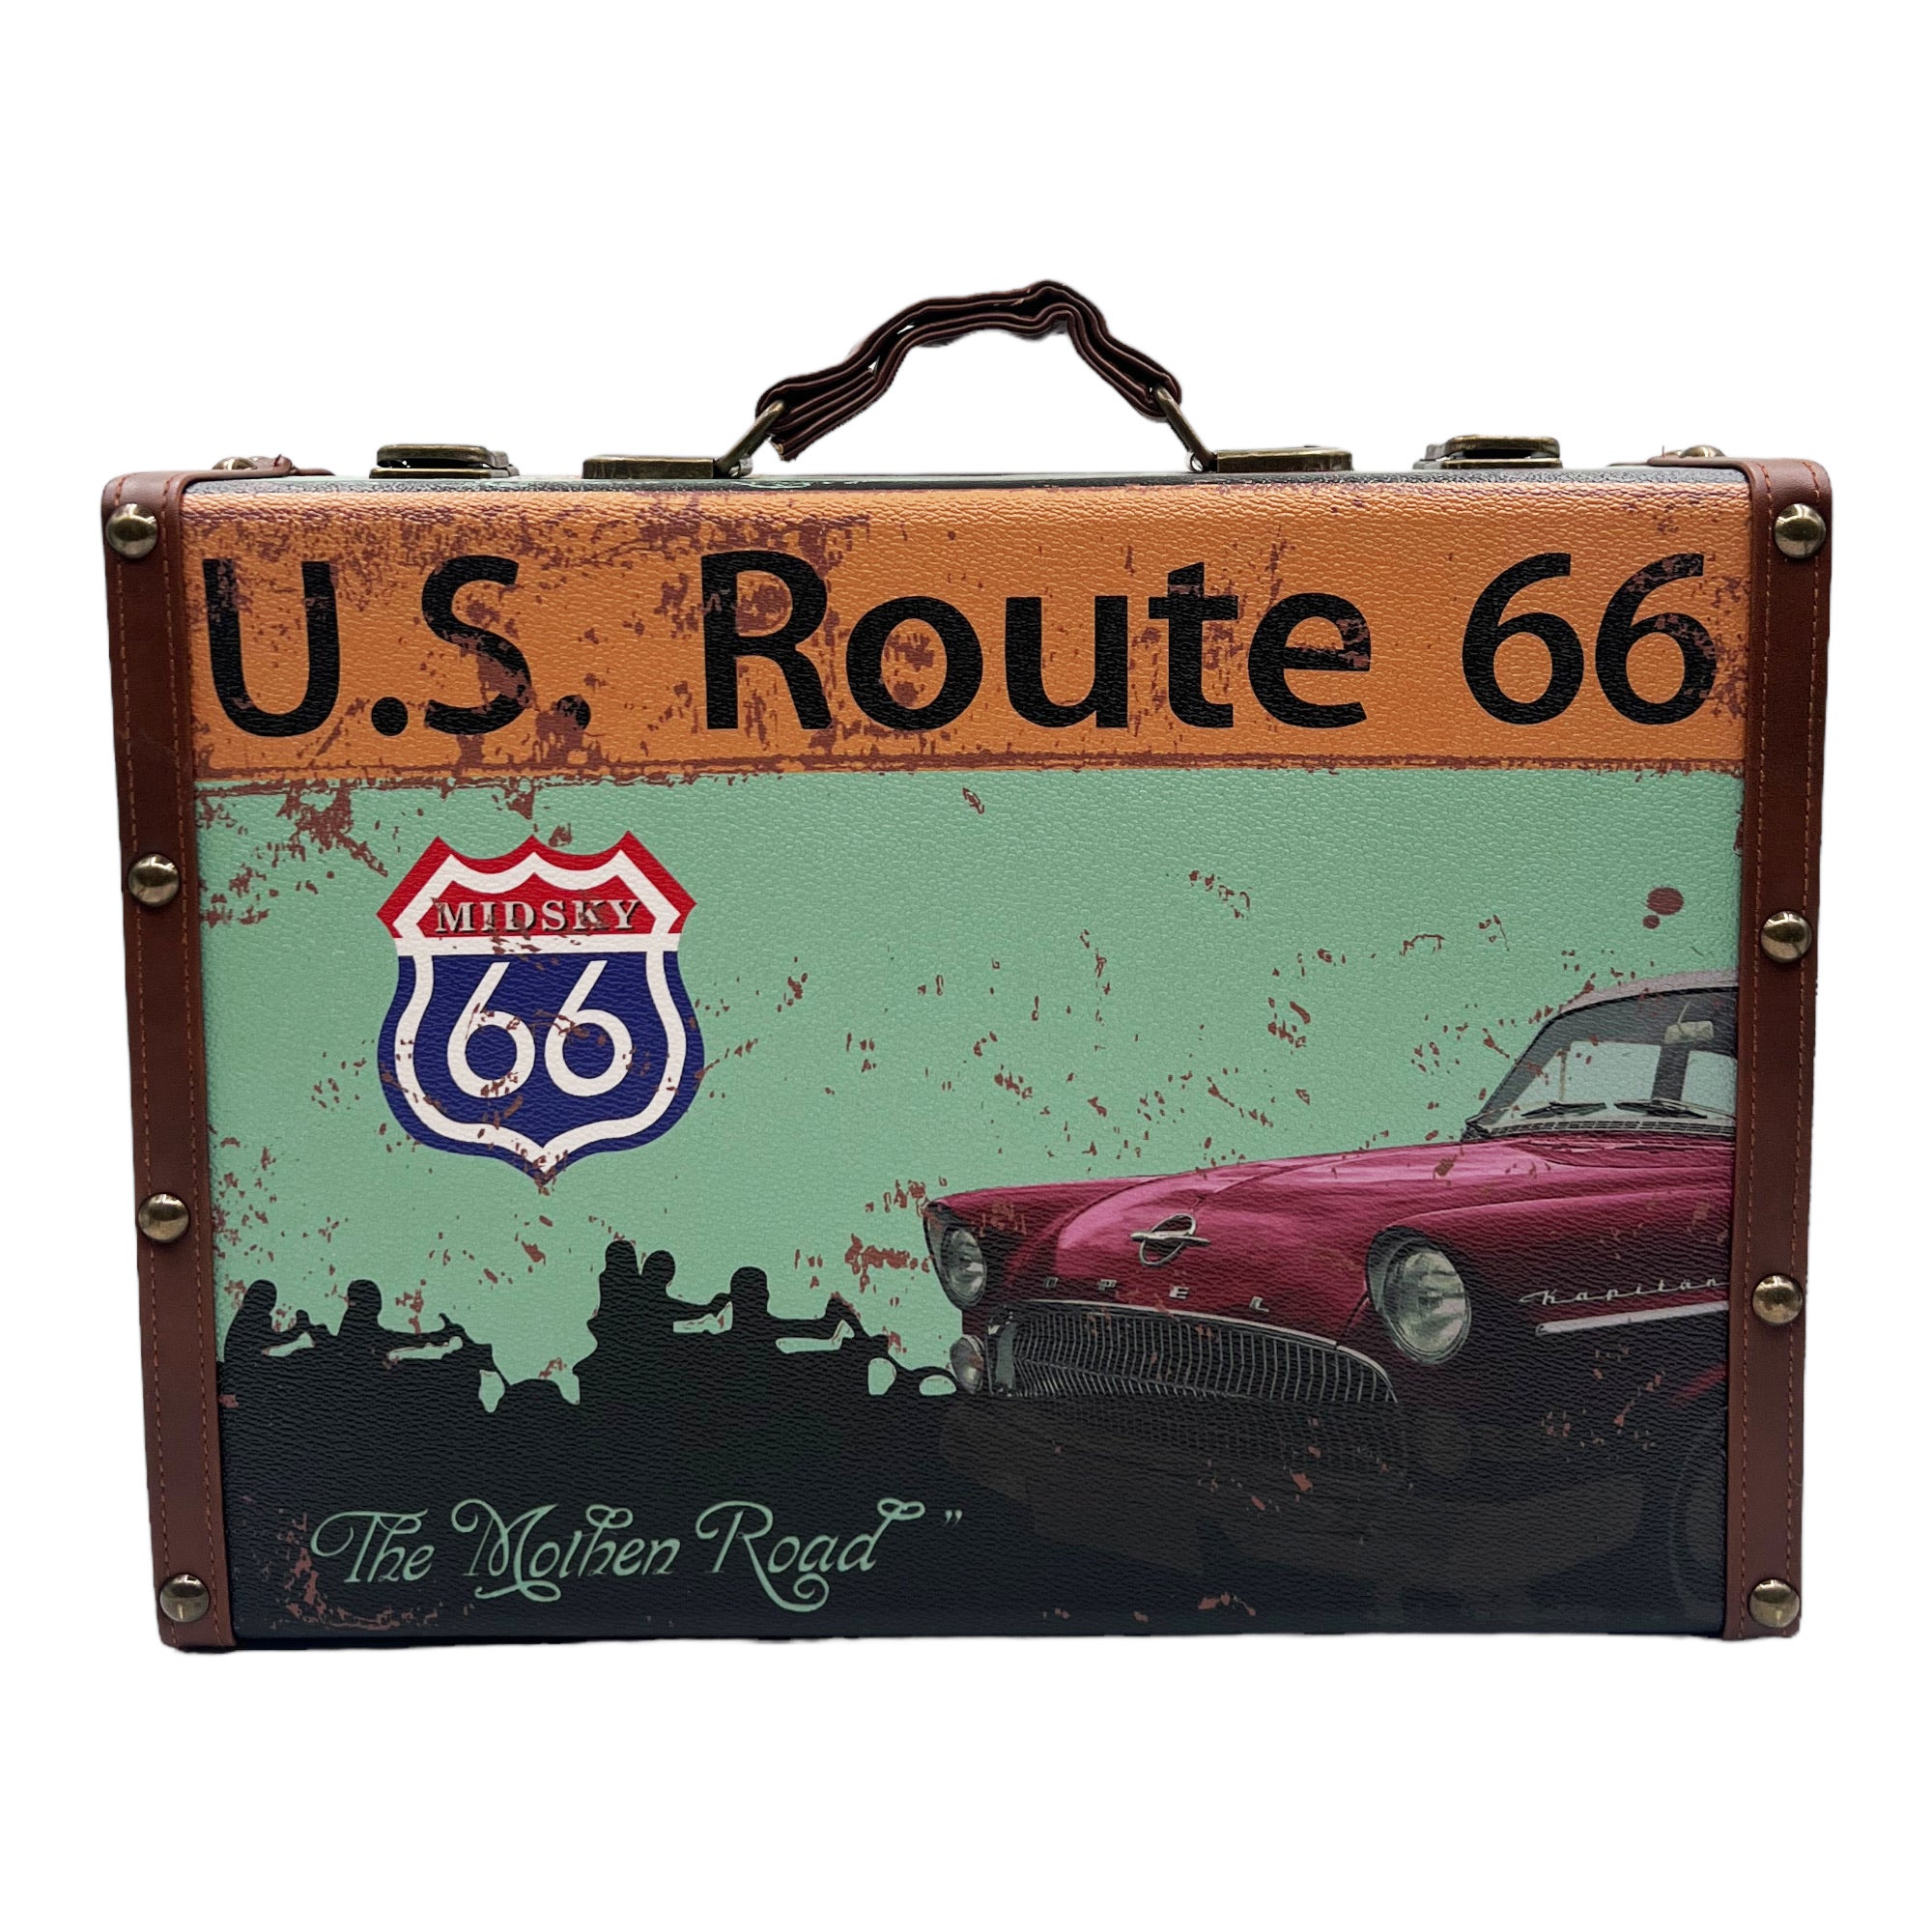 Eson - Hair Stylist Bag Barber Tools Carry Case Authentic Model (U.S. Route66)